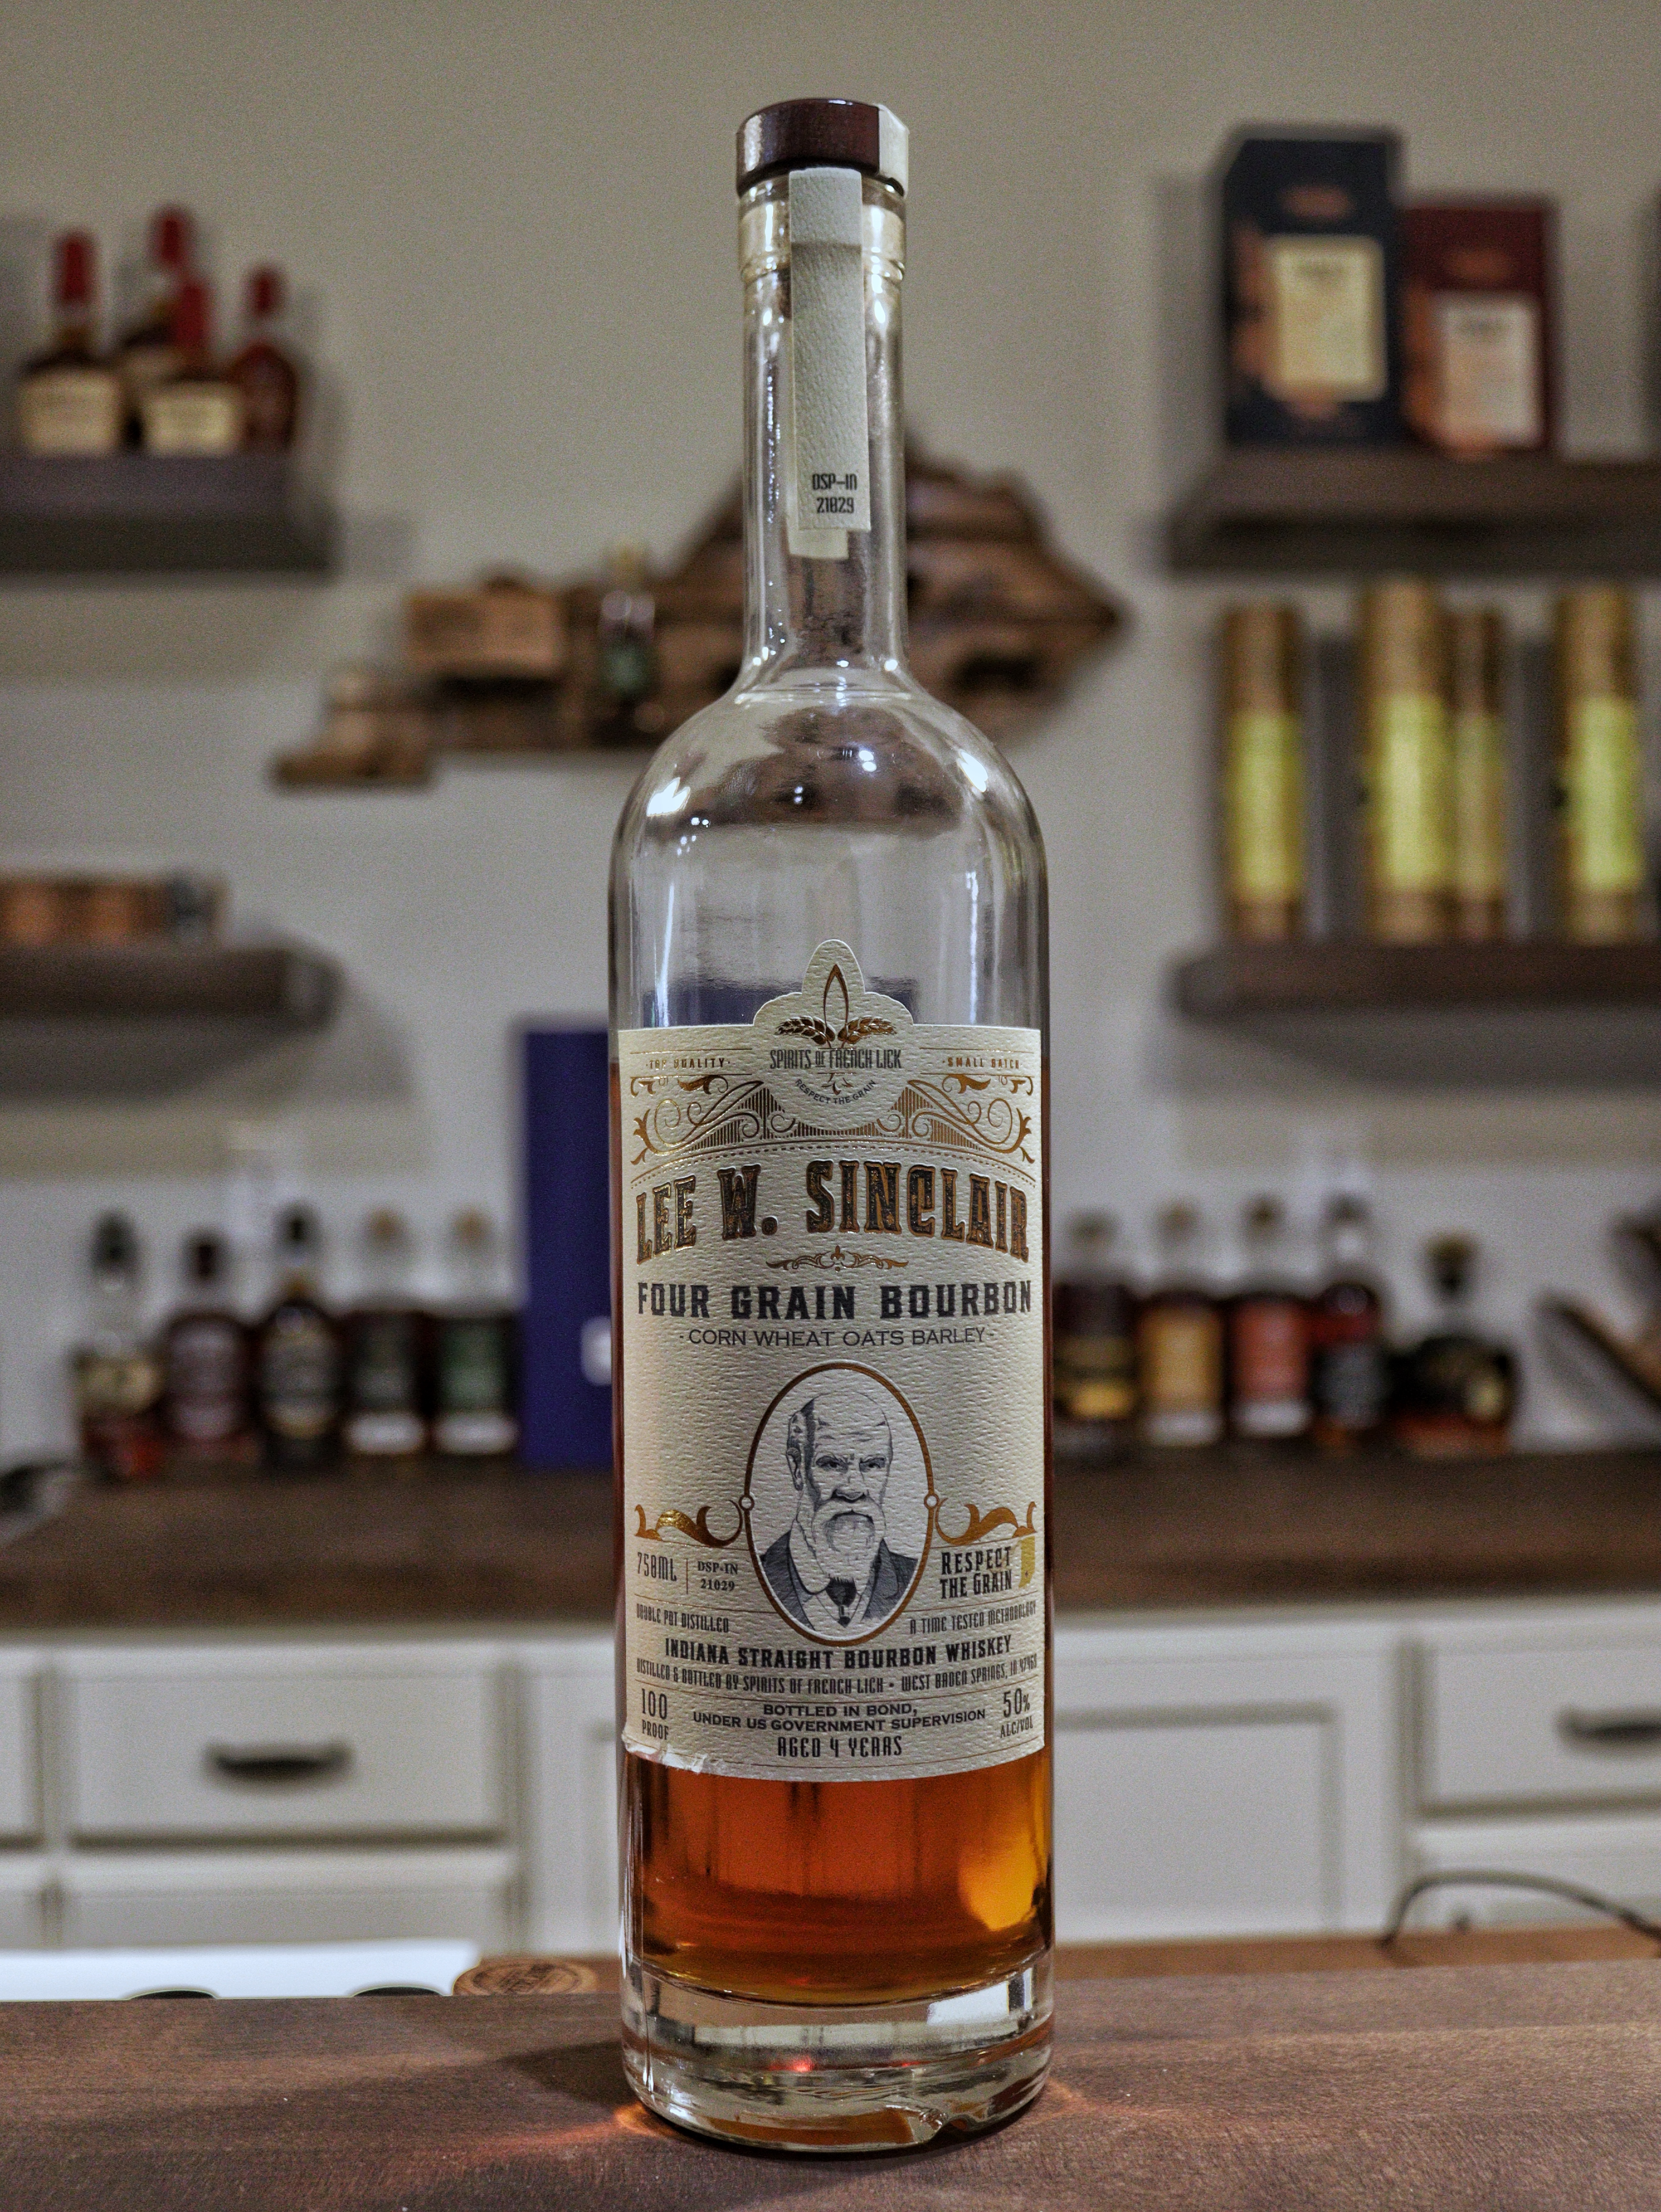 Have You Tried Lee Sinclair Bottled In Bond Bourbon?